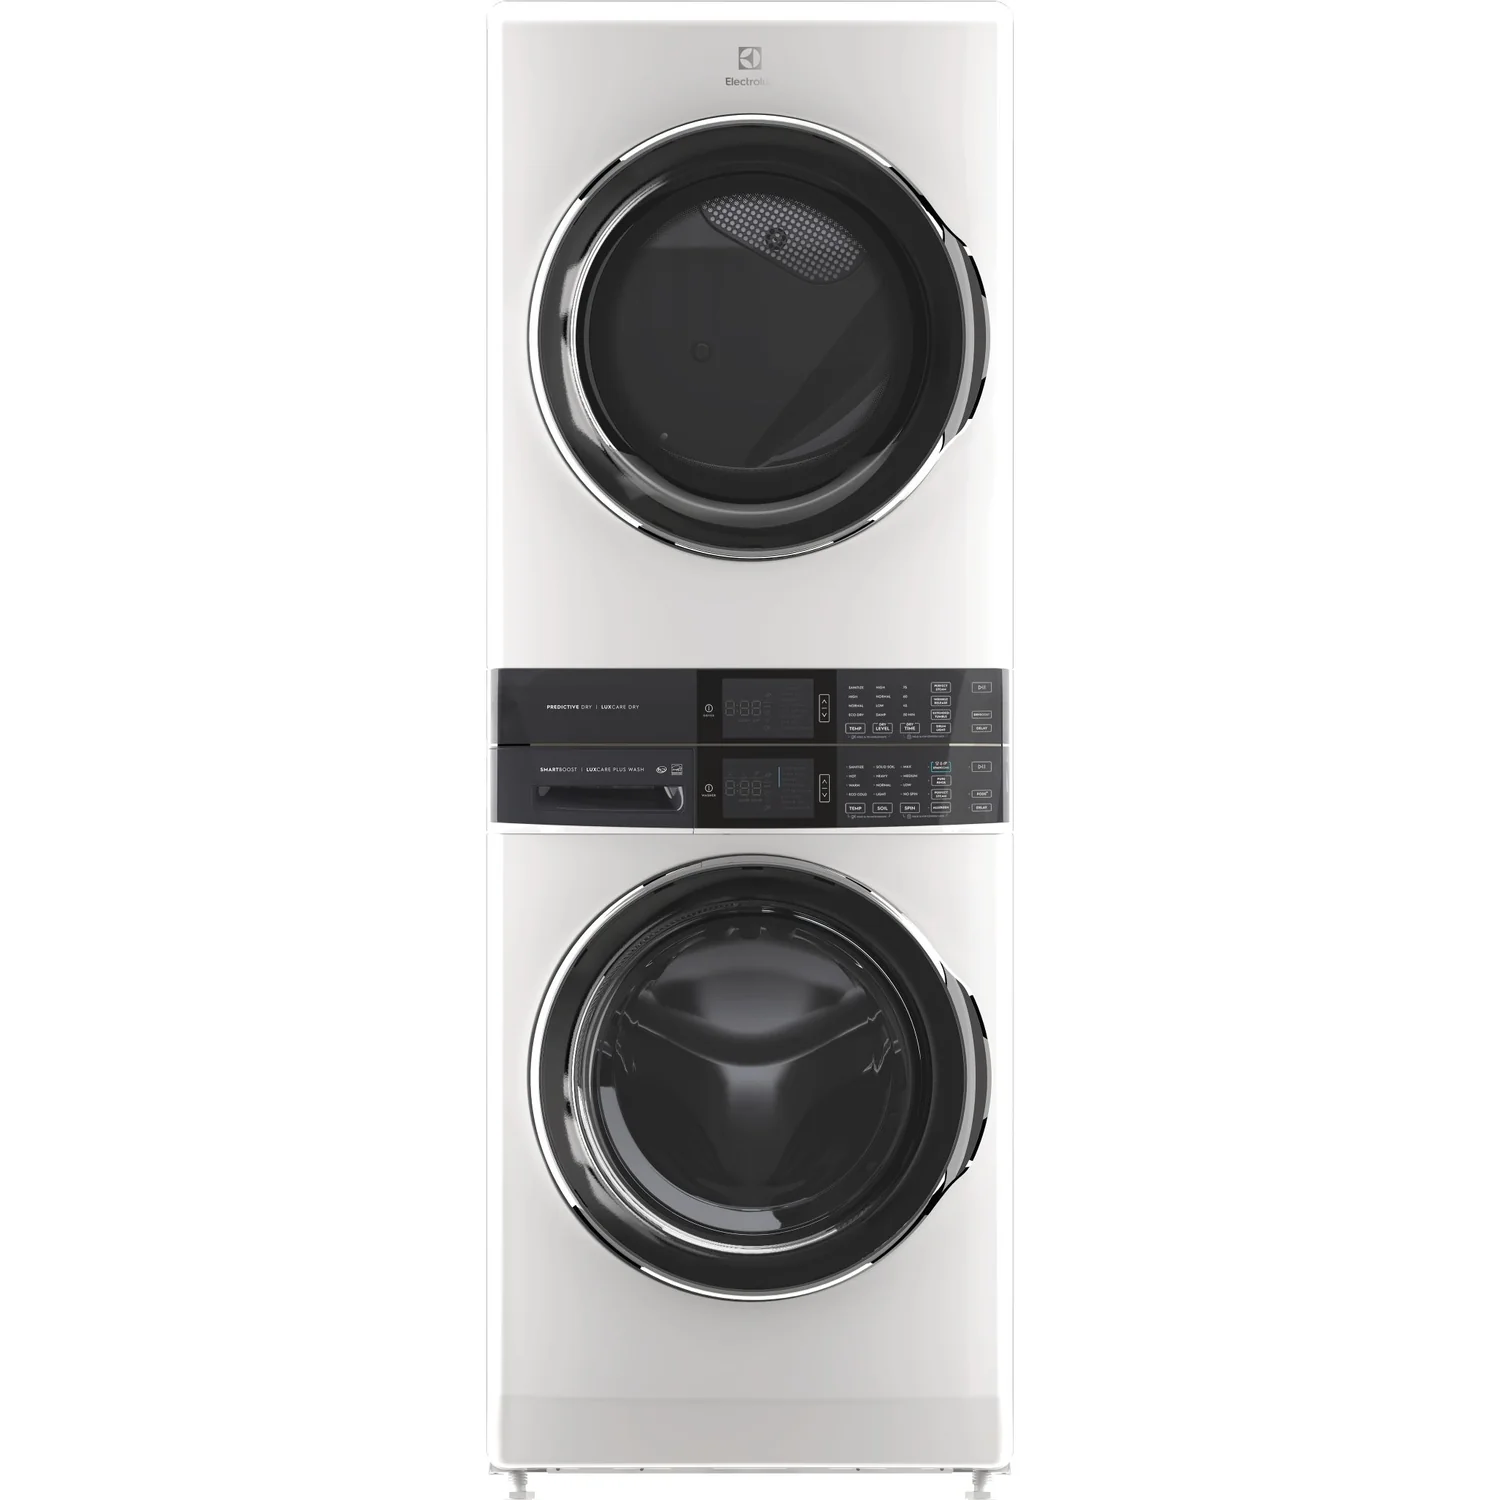 Electrolux Laundry Tower (ELTE760CAW) - White 